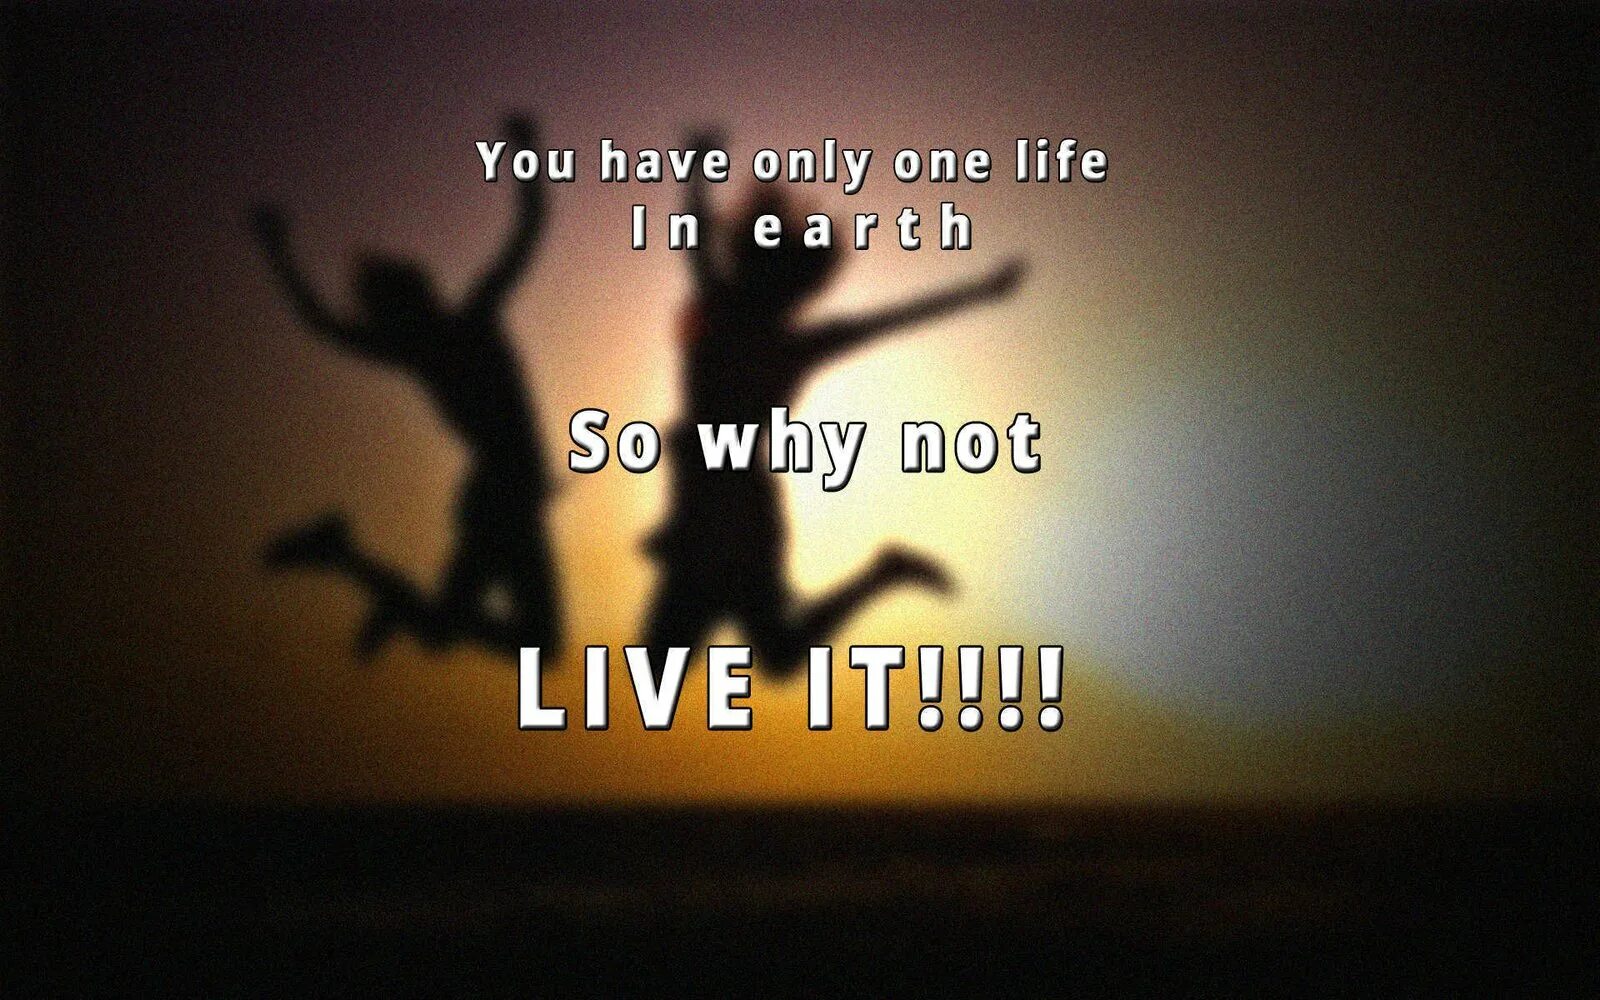 End ones life. Live the Life. Live Life картинки. One Life картинка. One Life Live it.